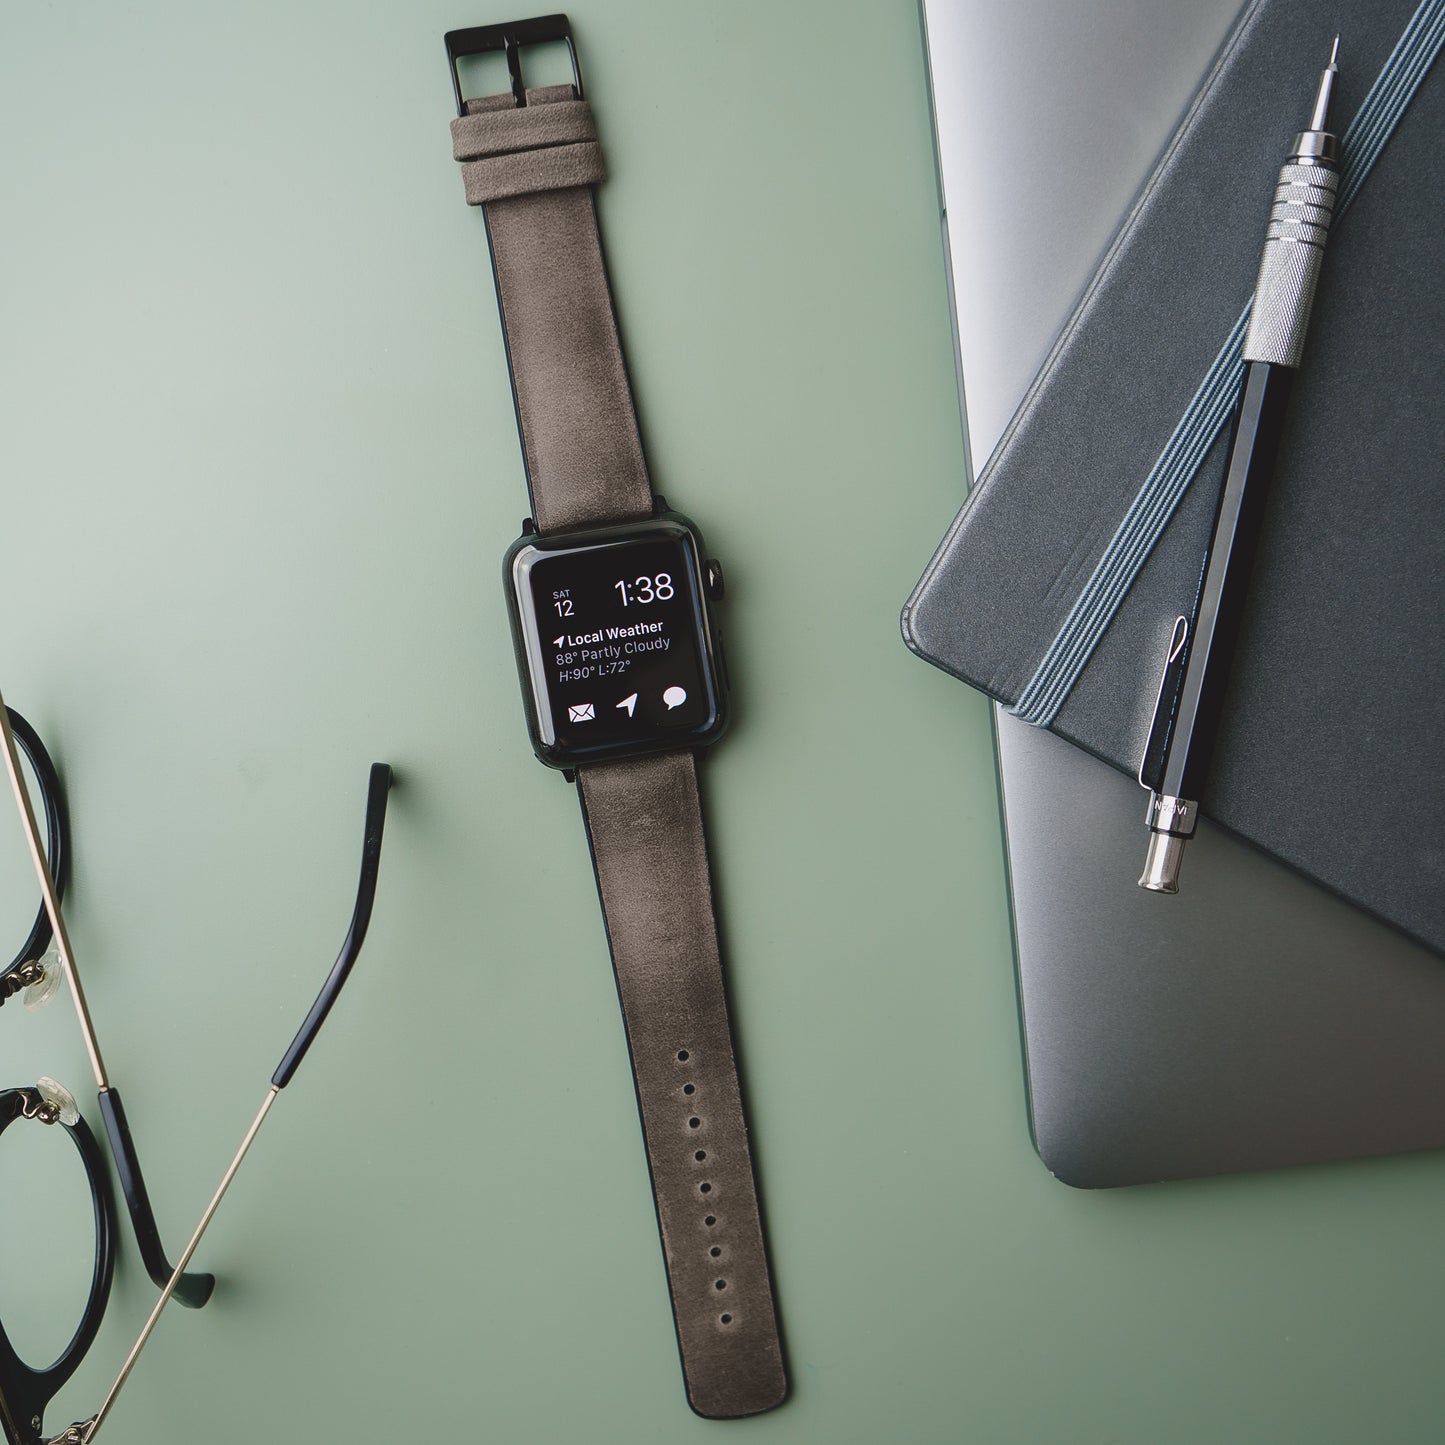 Apple Watch | Smoke Leather and Rubber Hybrid - Barton Watch Bands